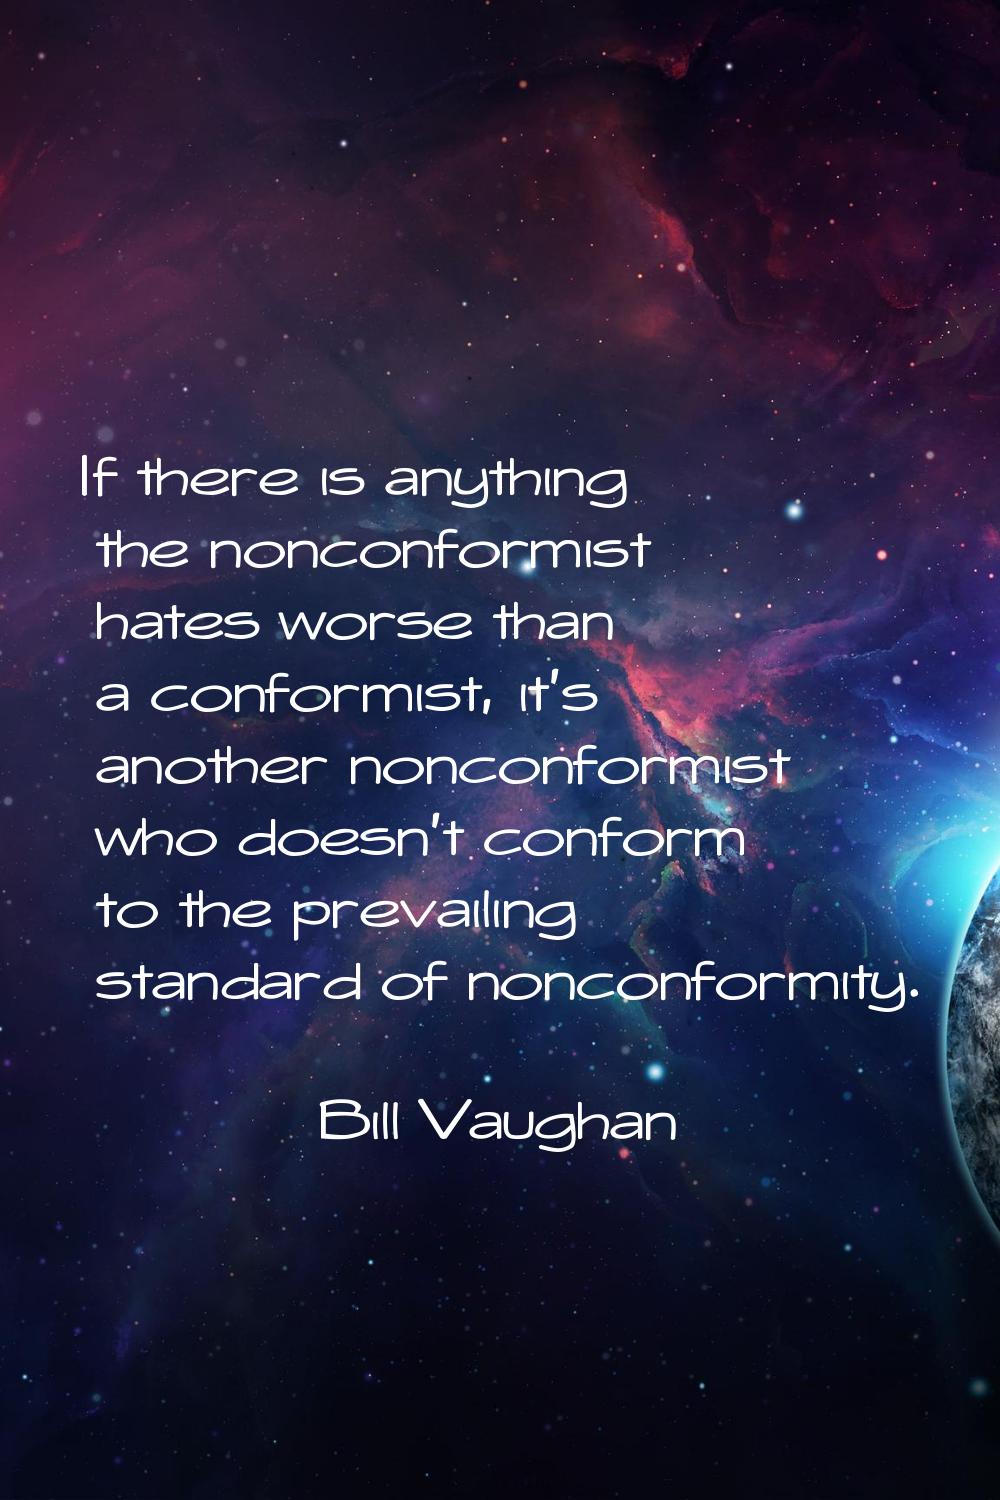 If there is anything the nonconformist hates worse than a conformist, it's another nonconformist wh